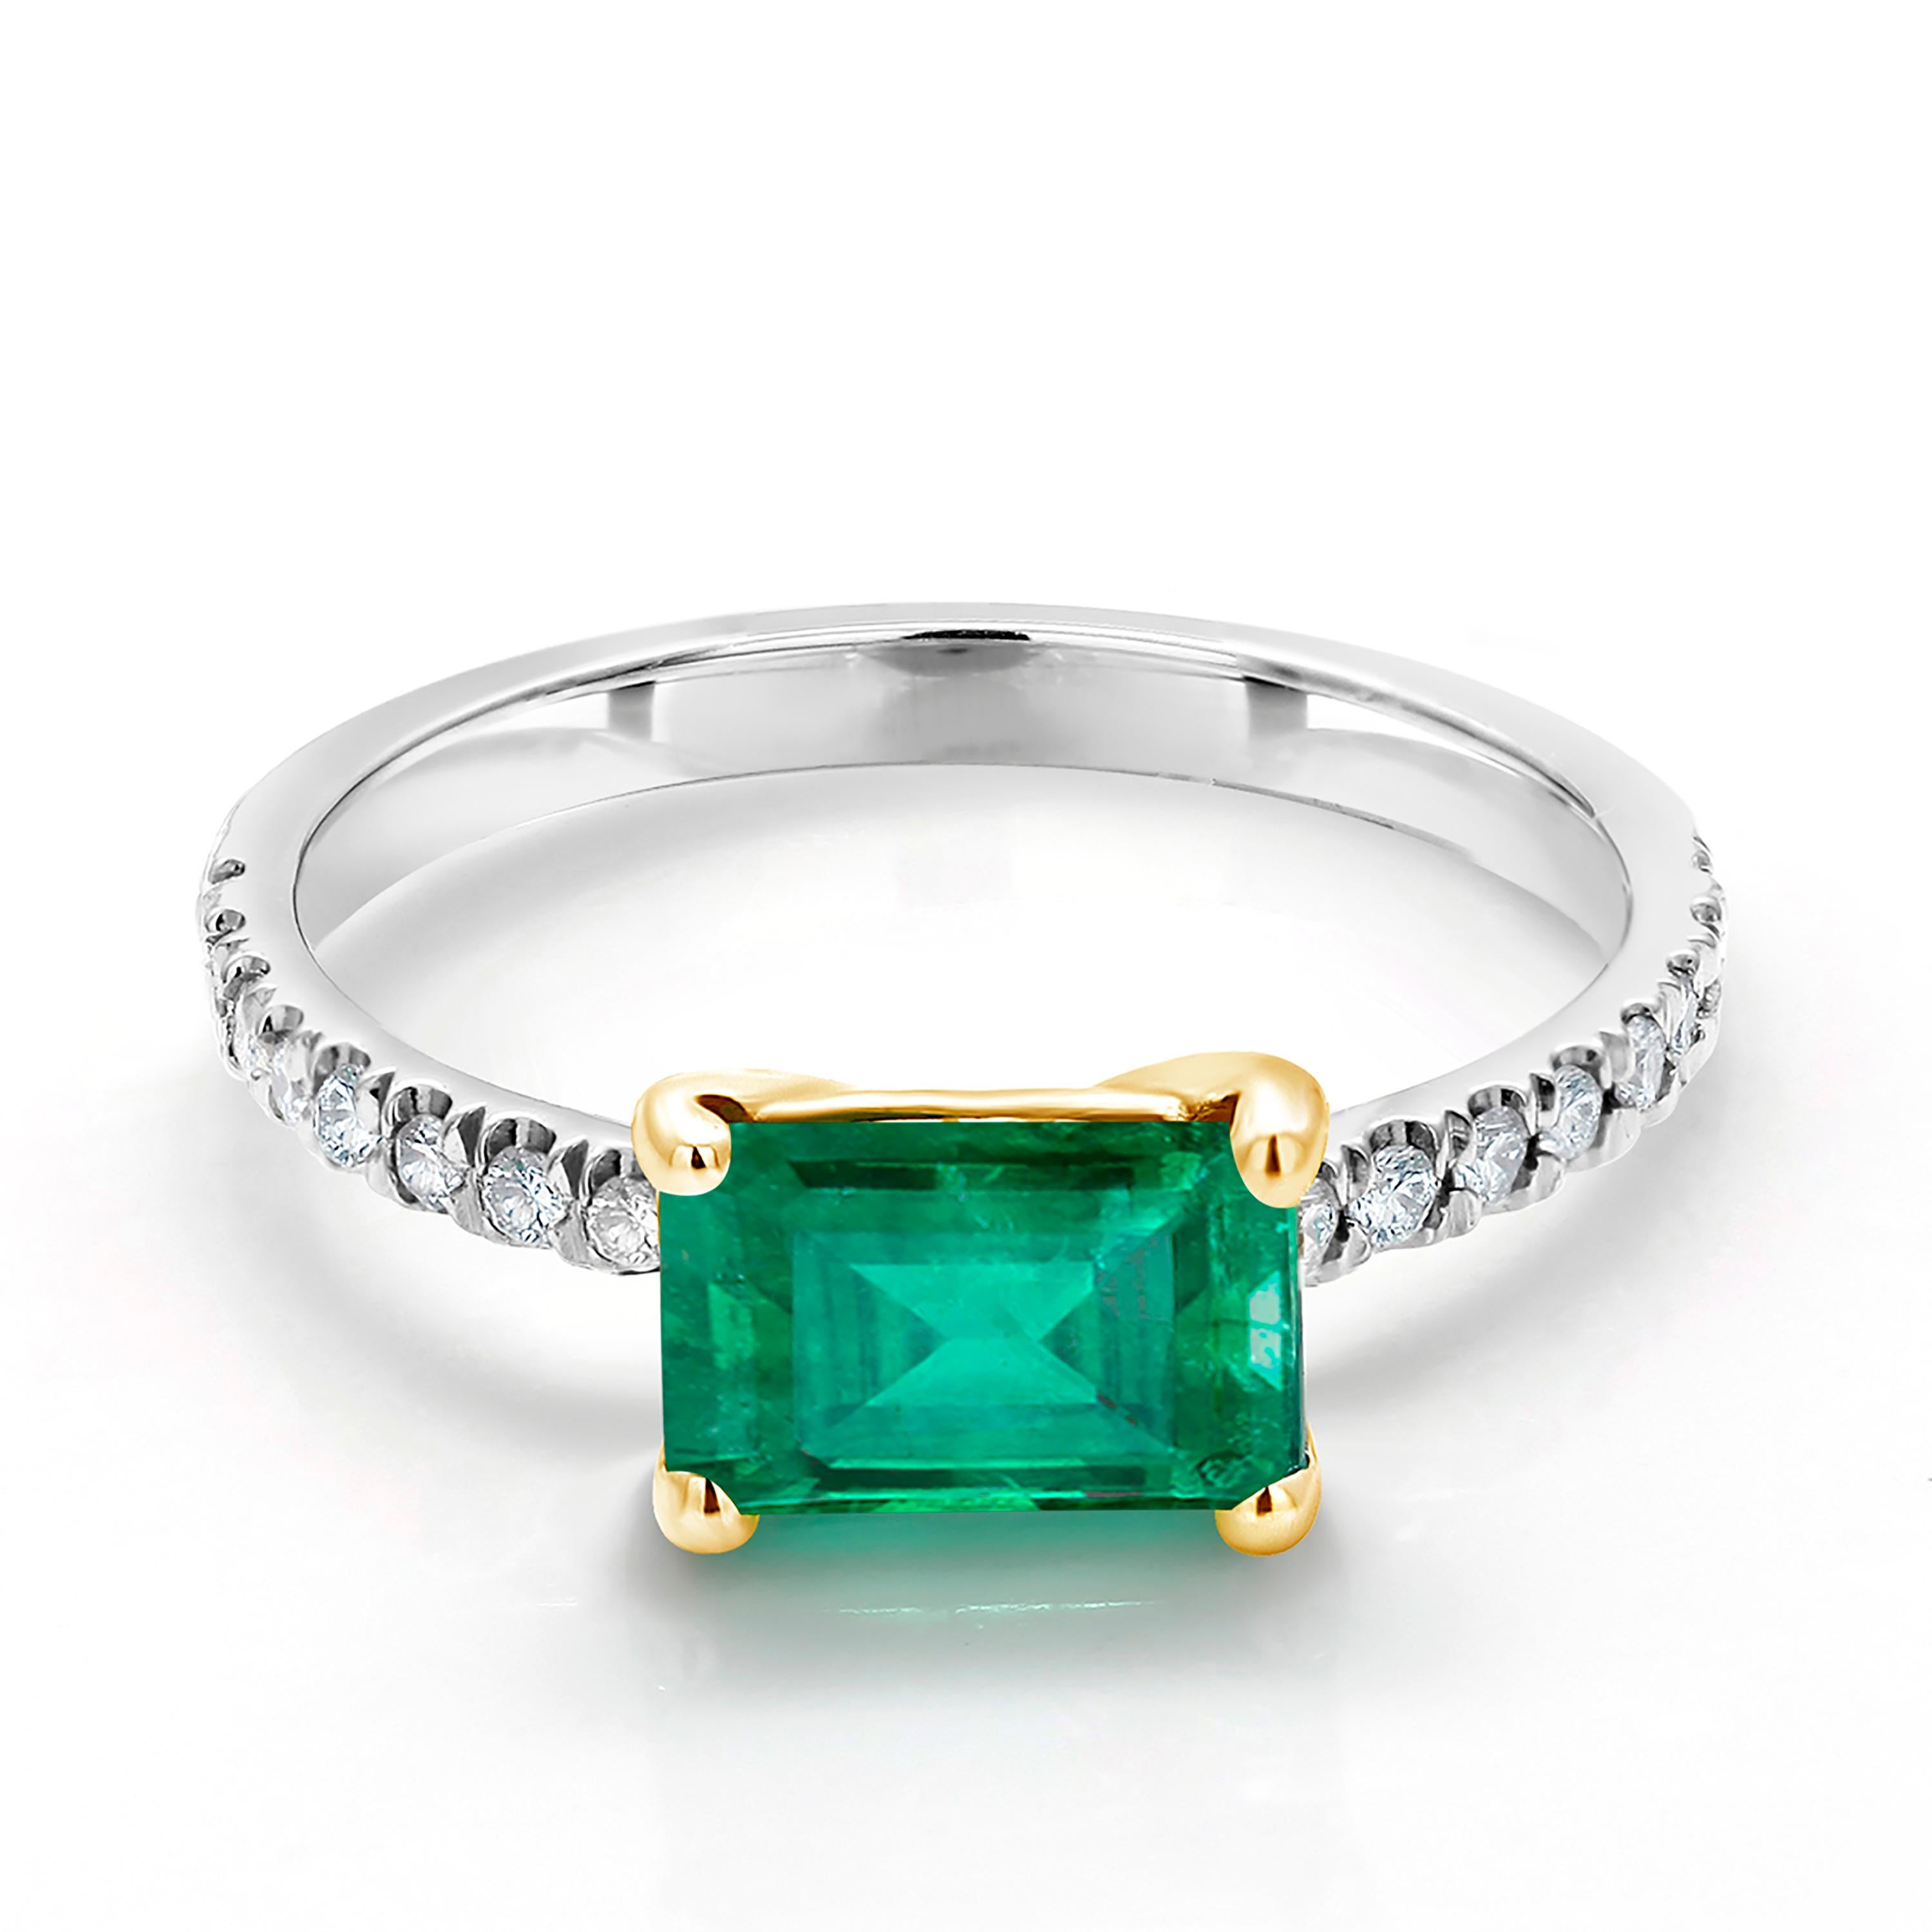 Eighteen karats yellow and white gold emerald and diamond cocktail ring 
Eighteen diamond weighing 0.40 carats
Columbia green emerald cut emerald weighing 1.30 carats
Emerald tone color is emerald green 
Ring finger size 7
Emerald measuring 9x7